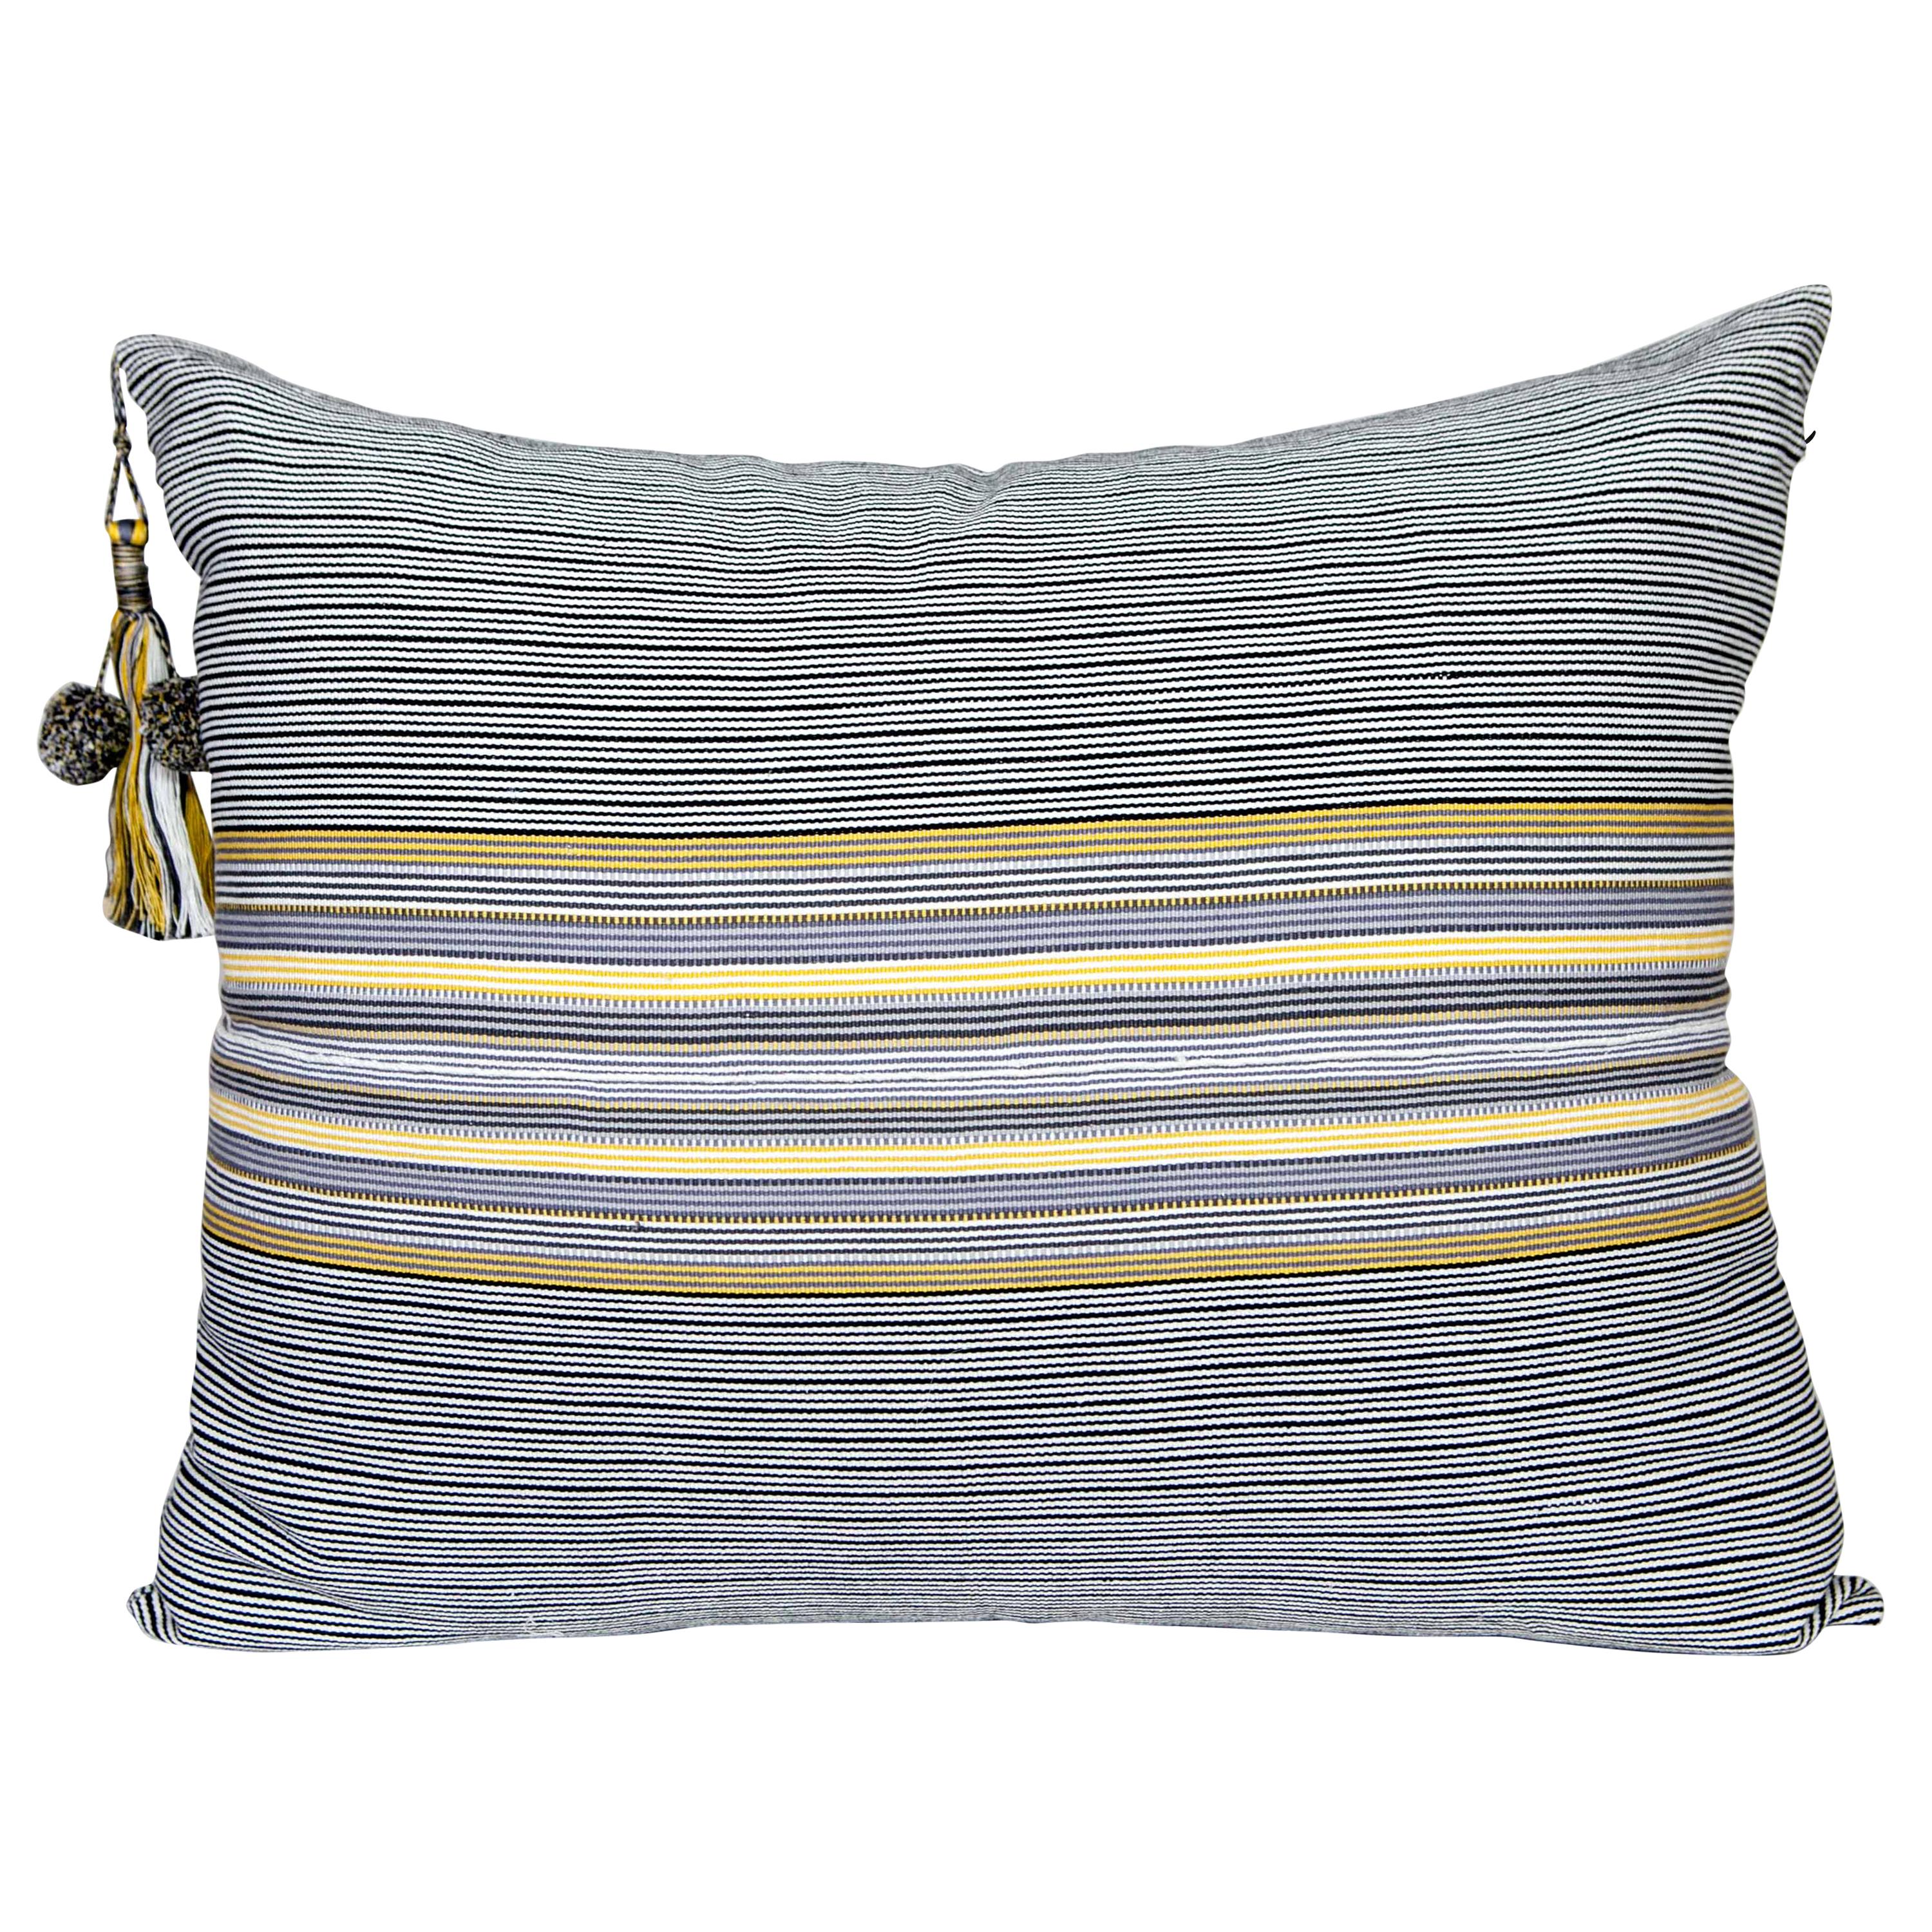 Handwoven Fine Cotton Throw Lg Pillow in Thin Grey Stripe with Tassel, in Stock For Sale